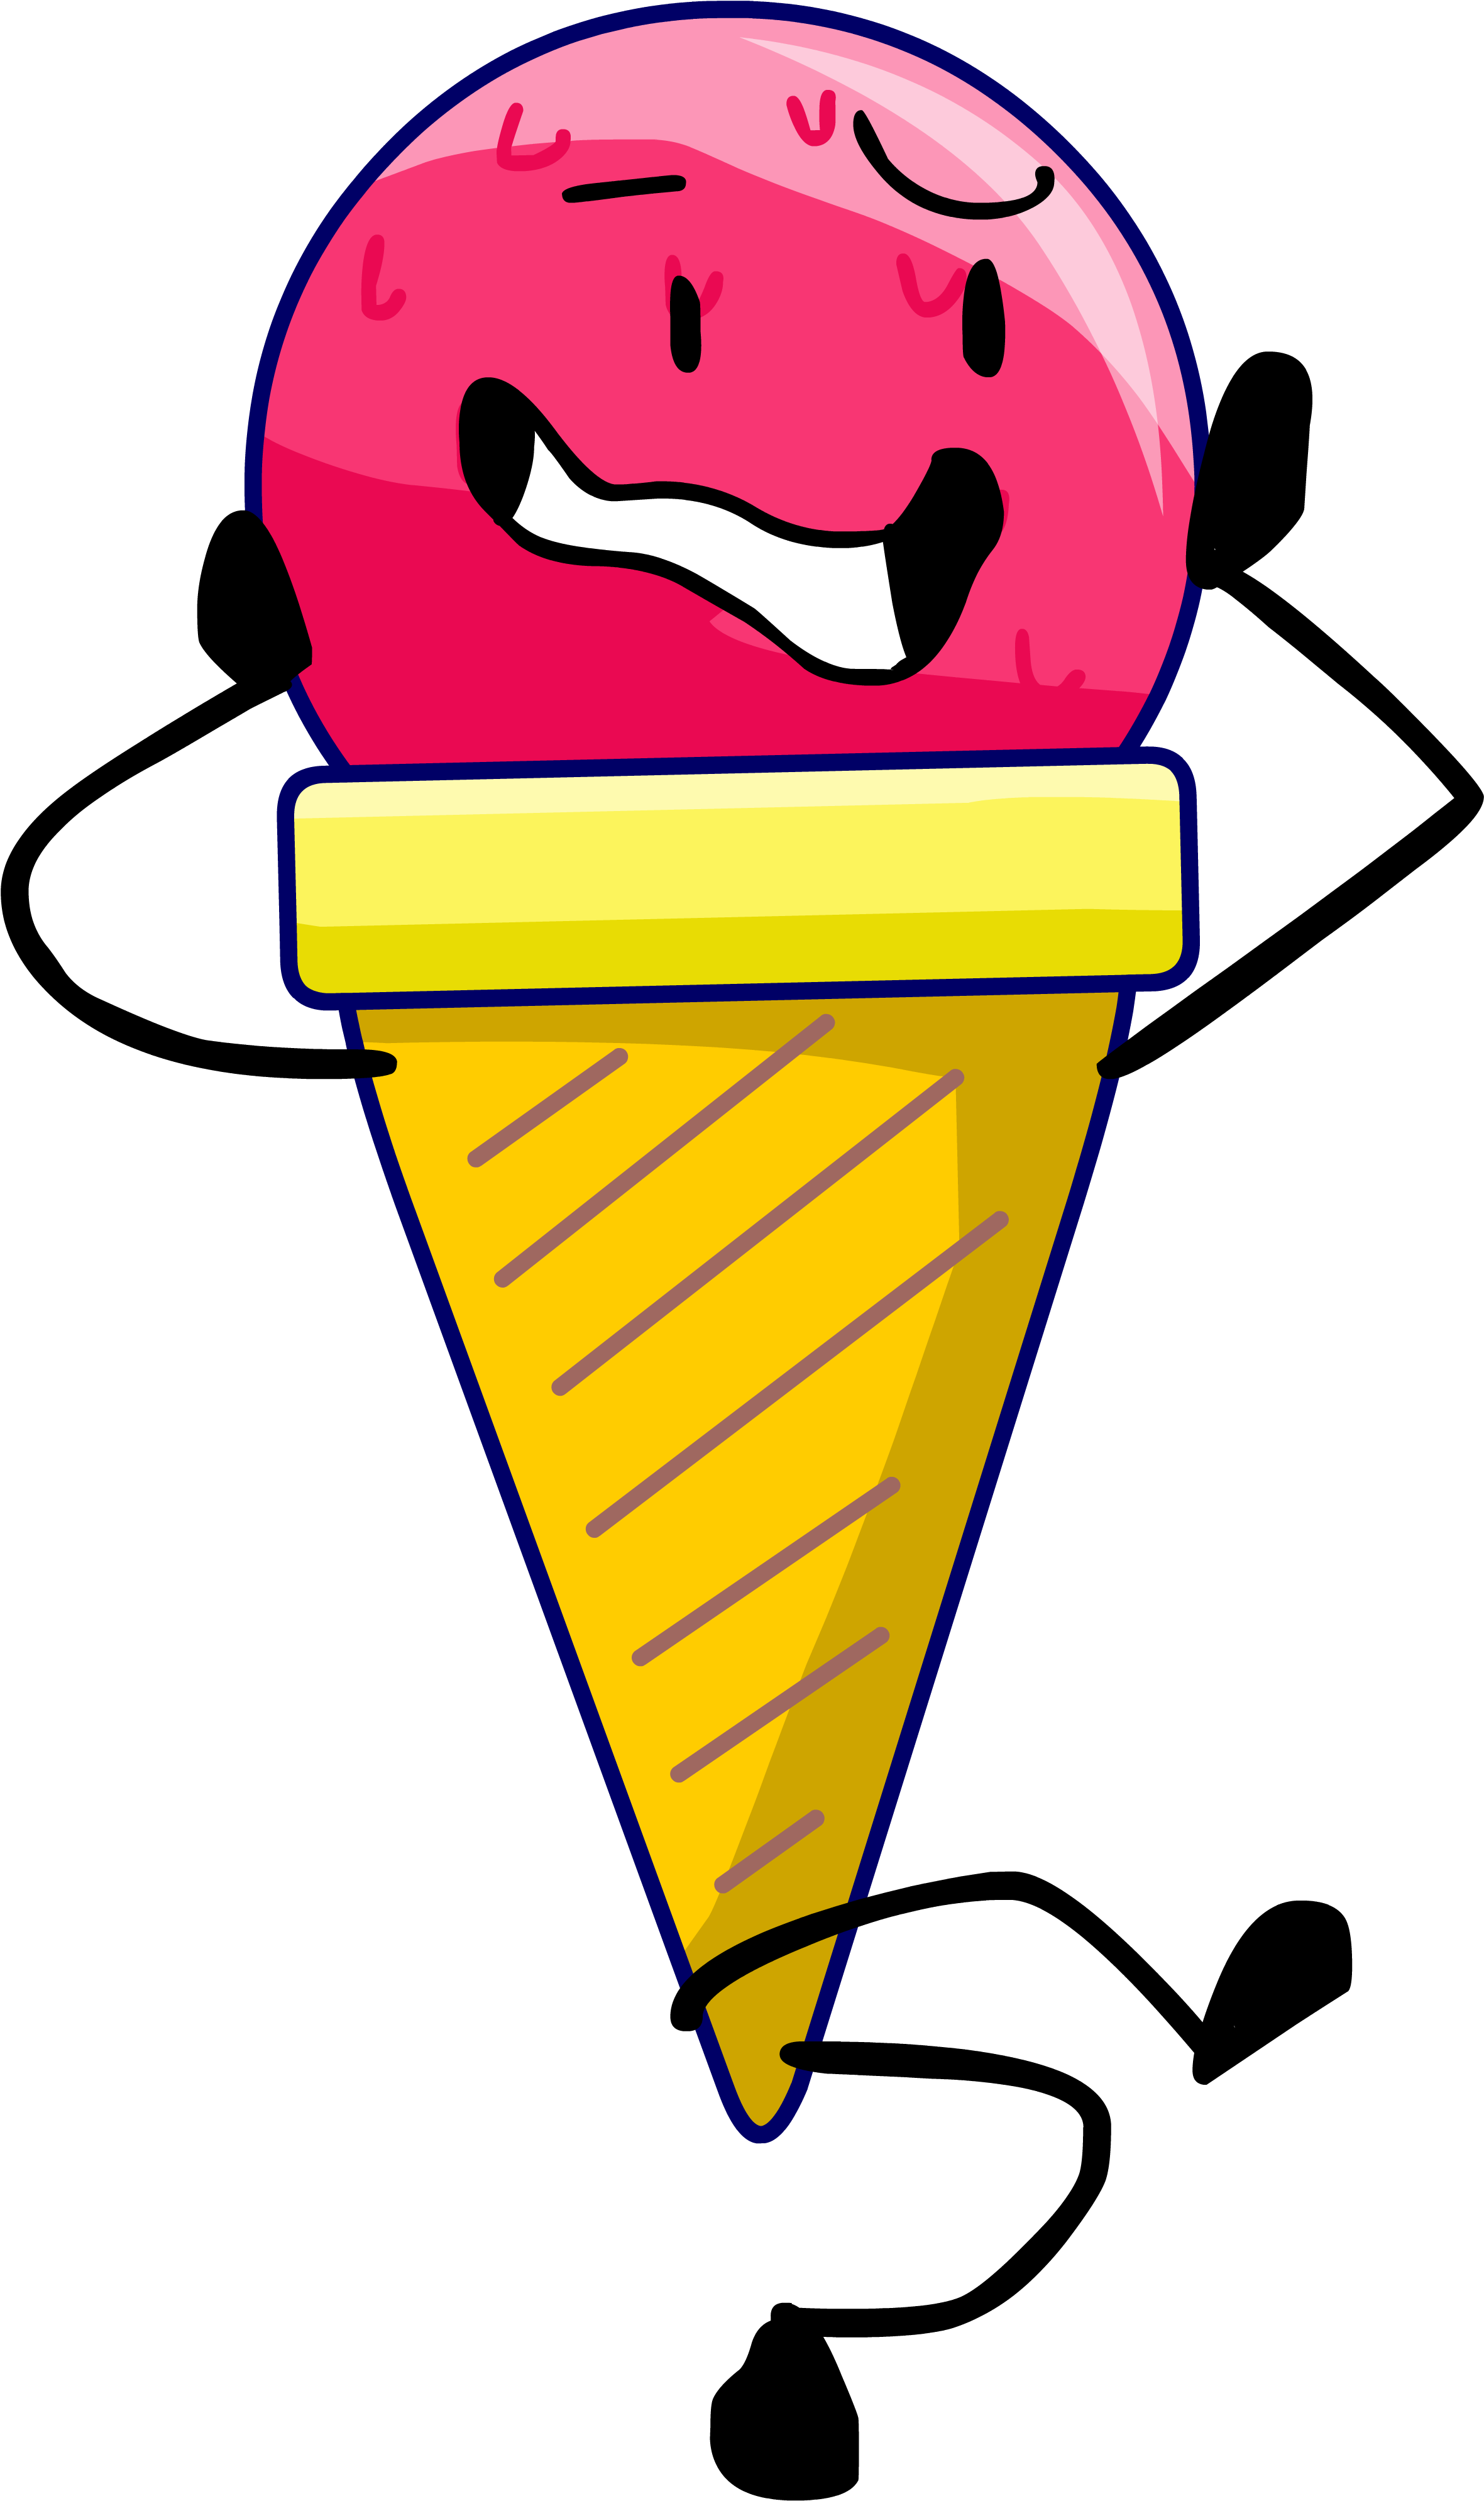 Huangislandofficial Object Activate - Object Show Ice Cream (2366x4000)